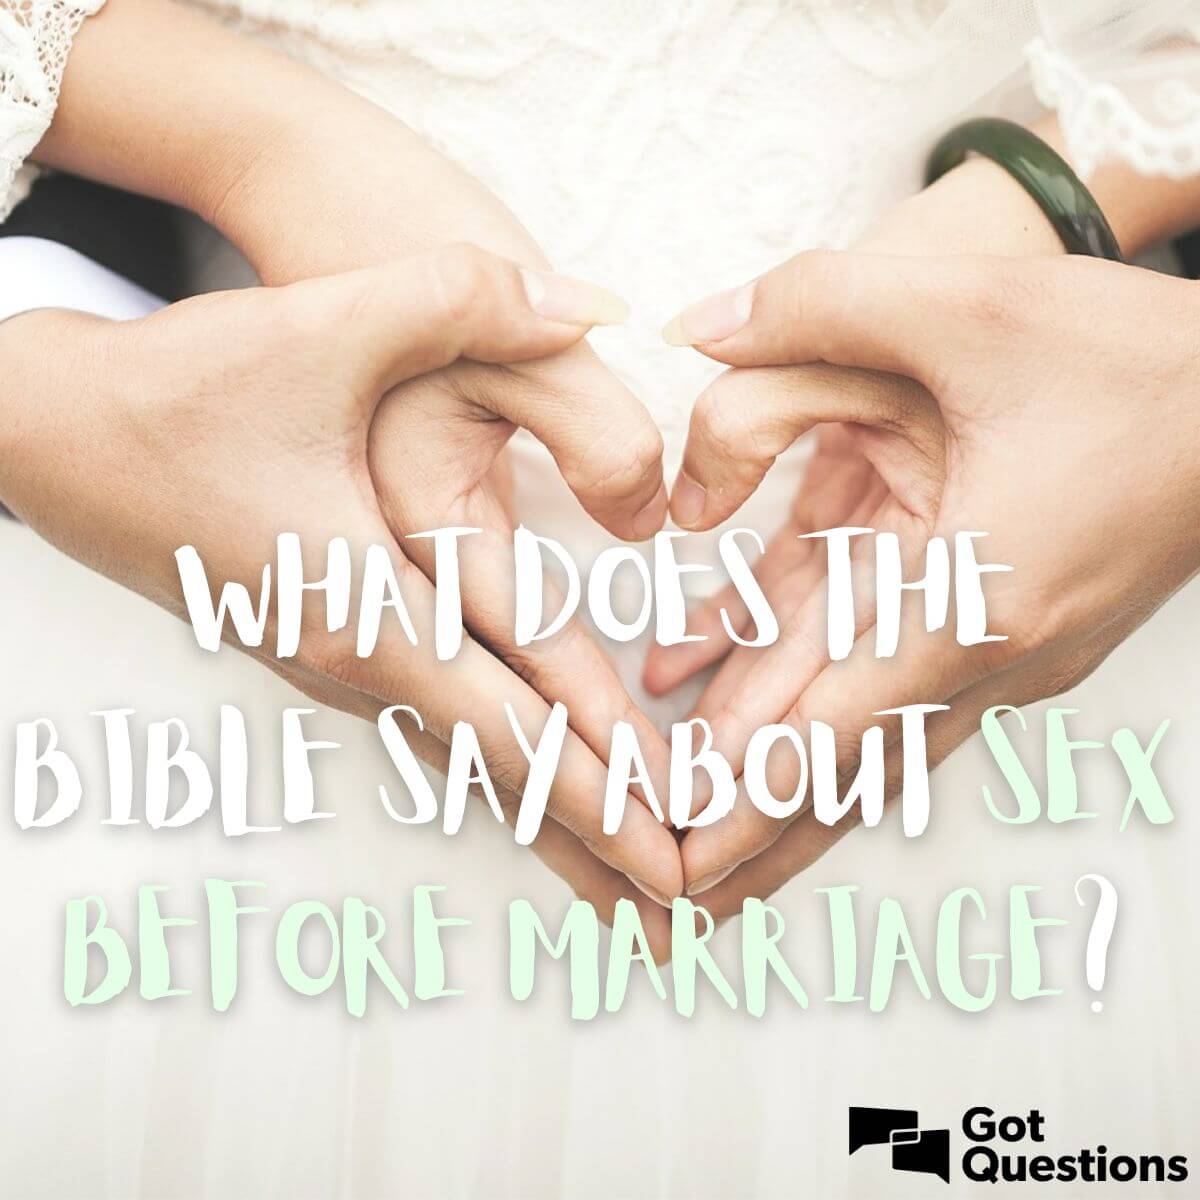 biblical references to married sex Xxx Photos